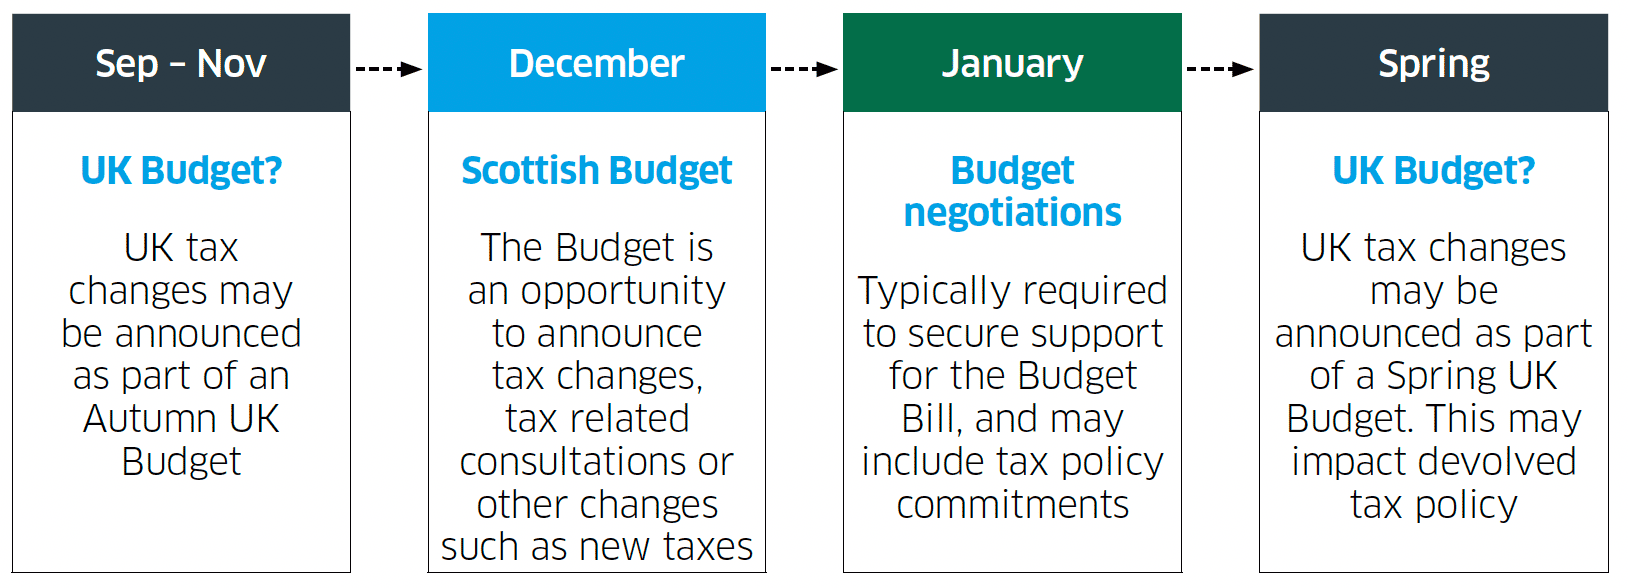 This figure sets out an annual cycle for tax policy making that can be expected under normal circumstances, outlining key events that could have an impact on devolved tax policy. This begins with a UK Budget between September and November, followed by a Scottish Budget, most commonly in December each year. January sees Budget negotiations (if required) and the passage of the Scottish Budget Bill through the Scottish Parliament. Following these key milestones, in the Spring the UK Government will often have their second fiscal event, either another UK Budget or a Budget Statement, which could have an impact on devolved tax policy.